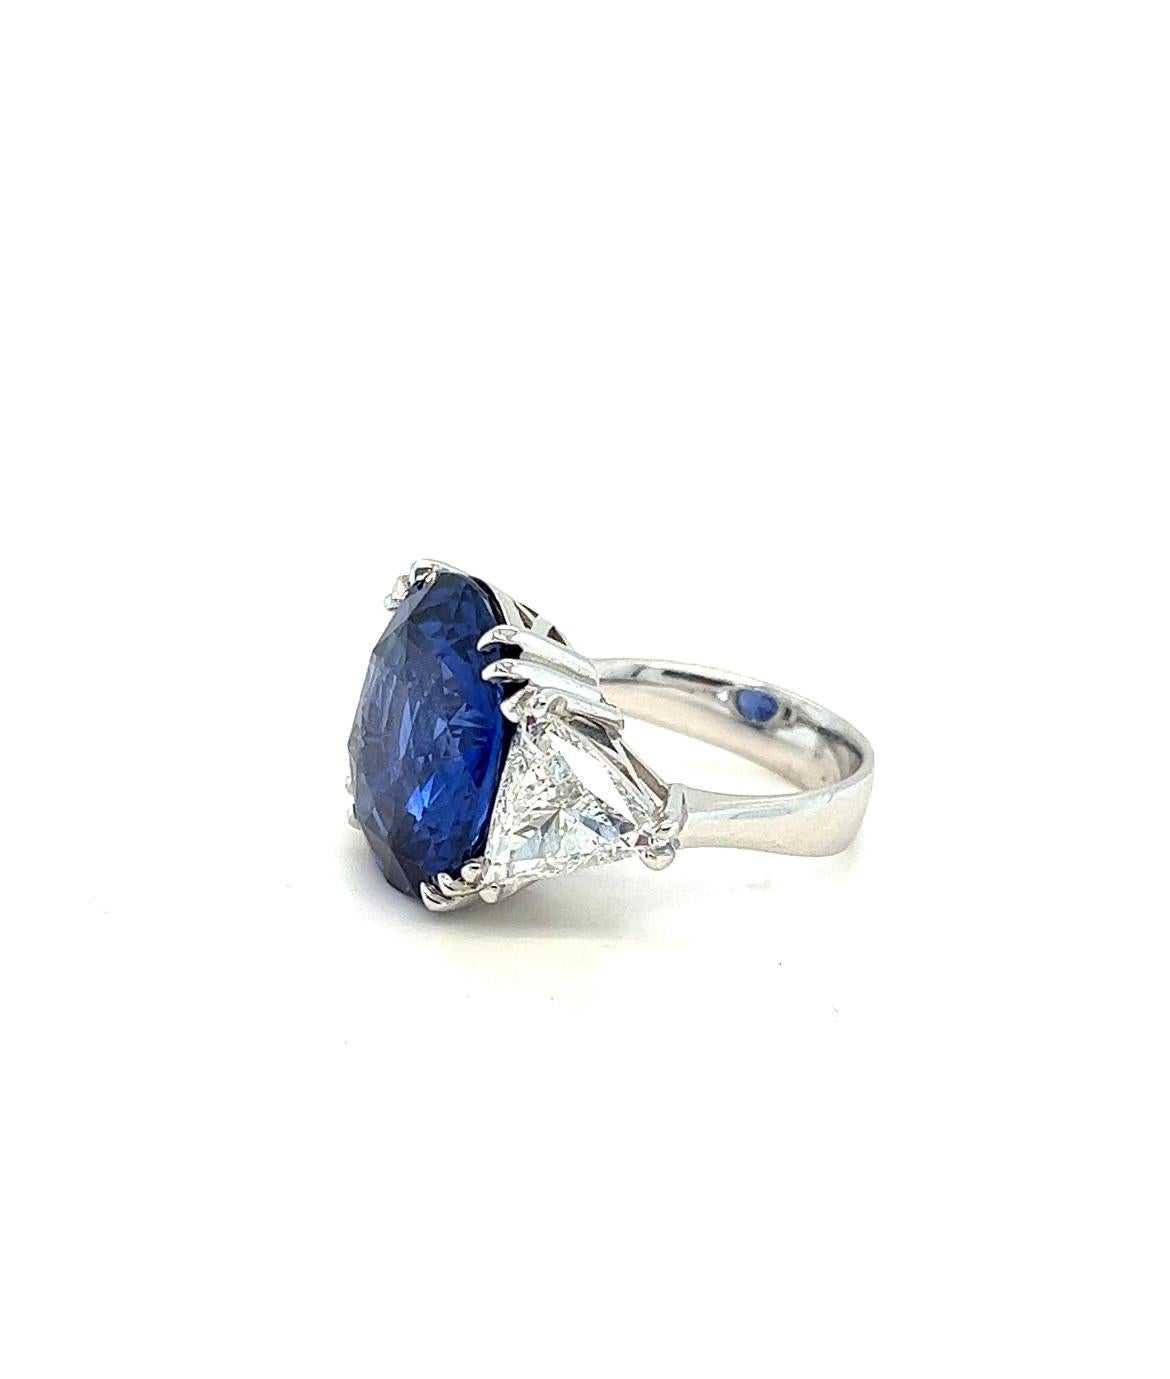 GIA Certified 14.64 Carat Blue Sapphire Diamond Ring For Sale 3